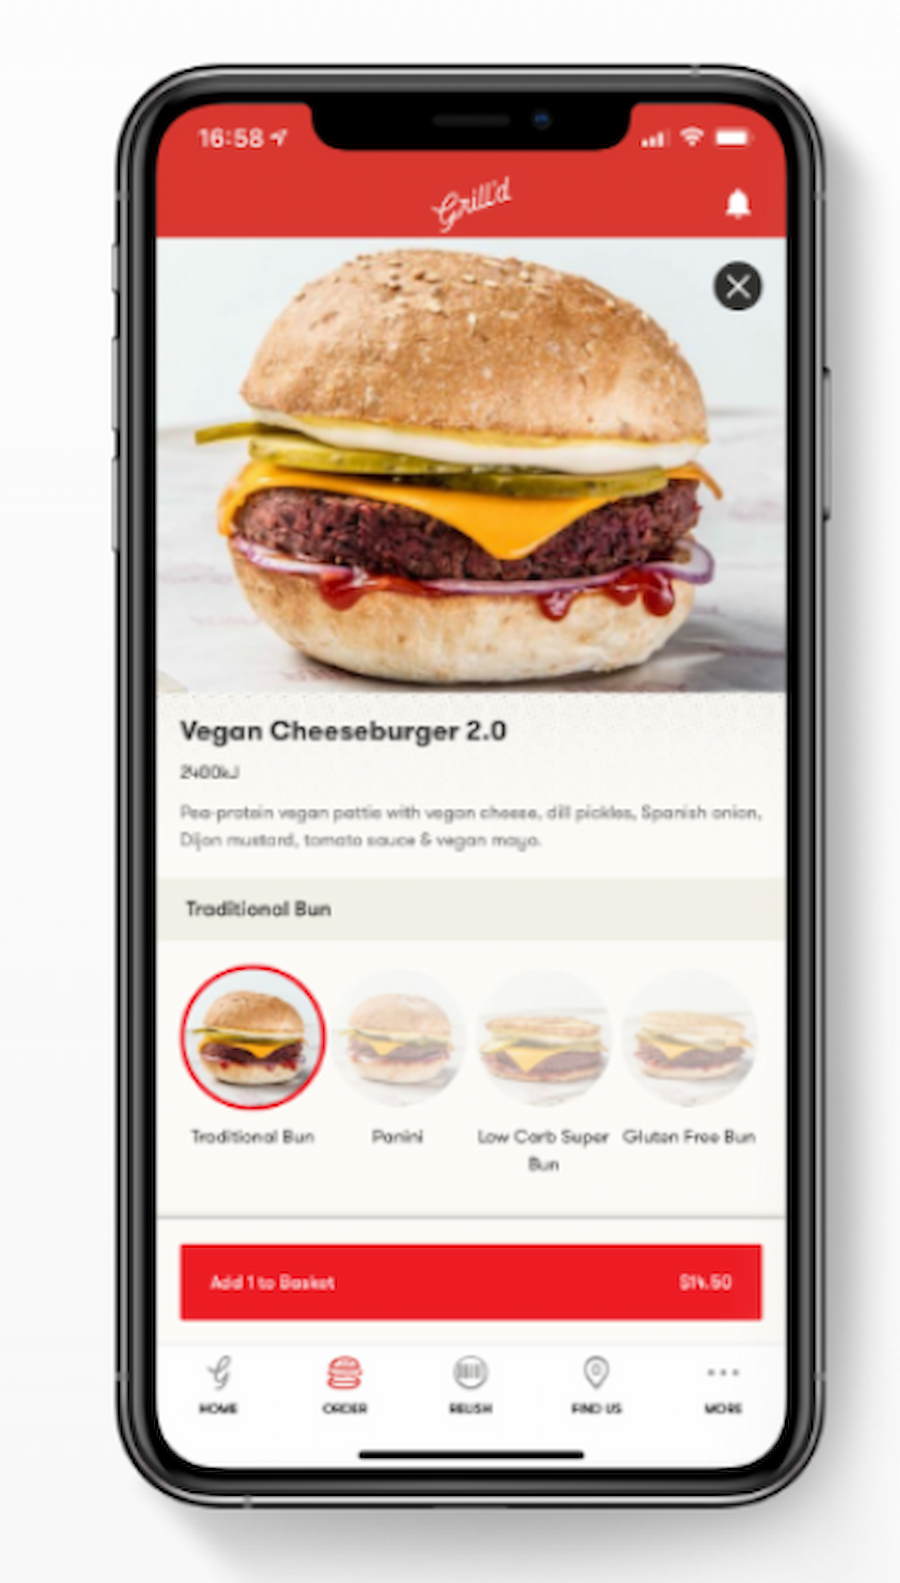 NMAD: Grill'd mobile app screenshot